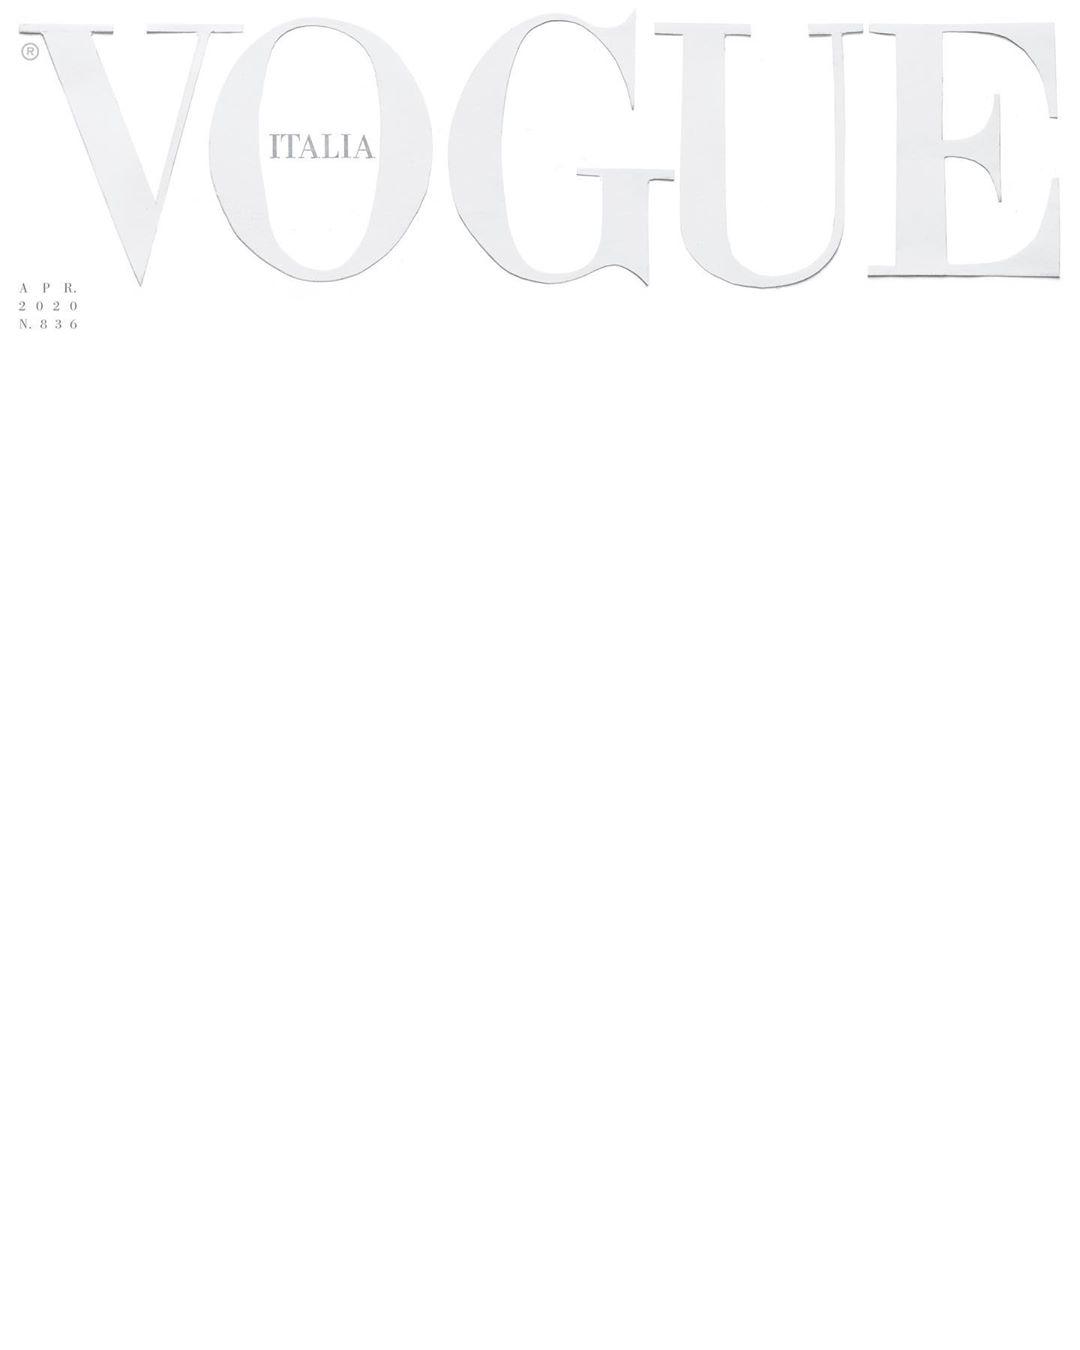 A message of strength and hope': 'Vogue Italia' publishes blank